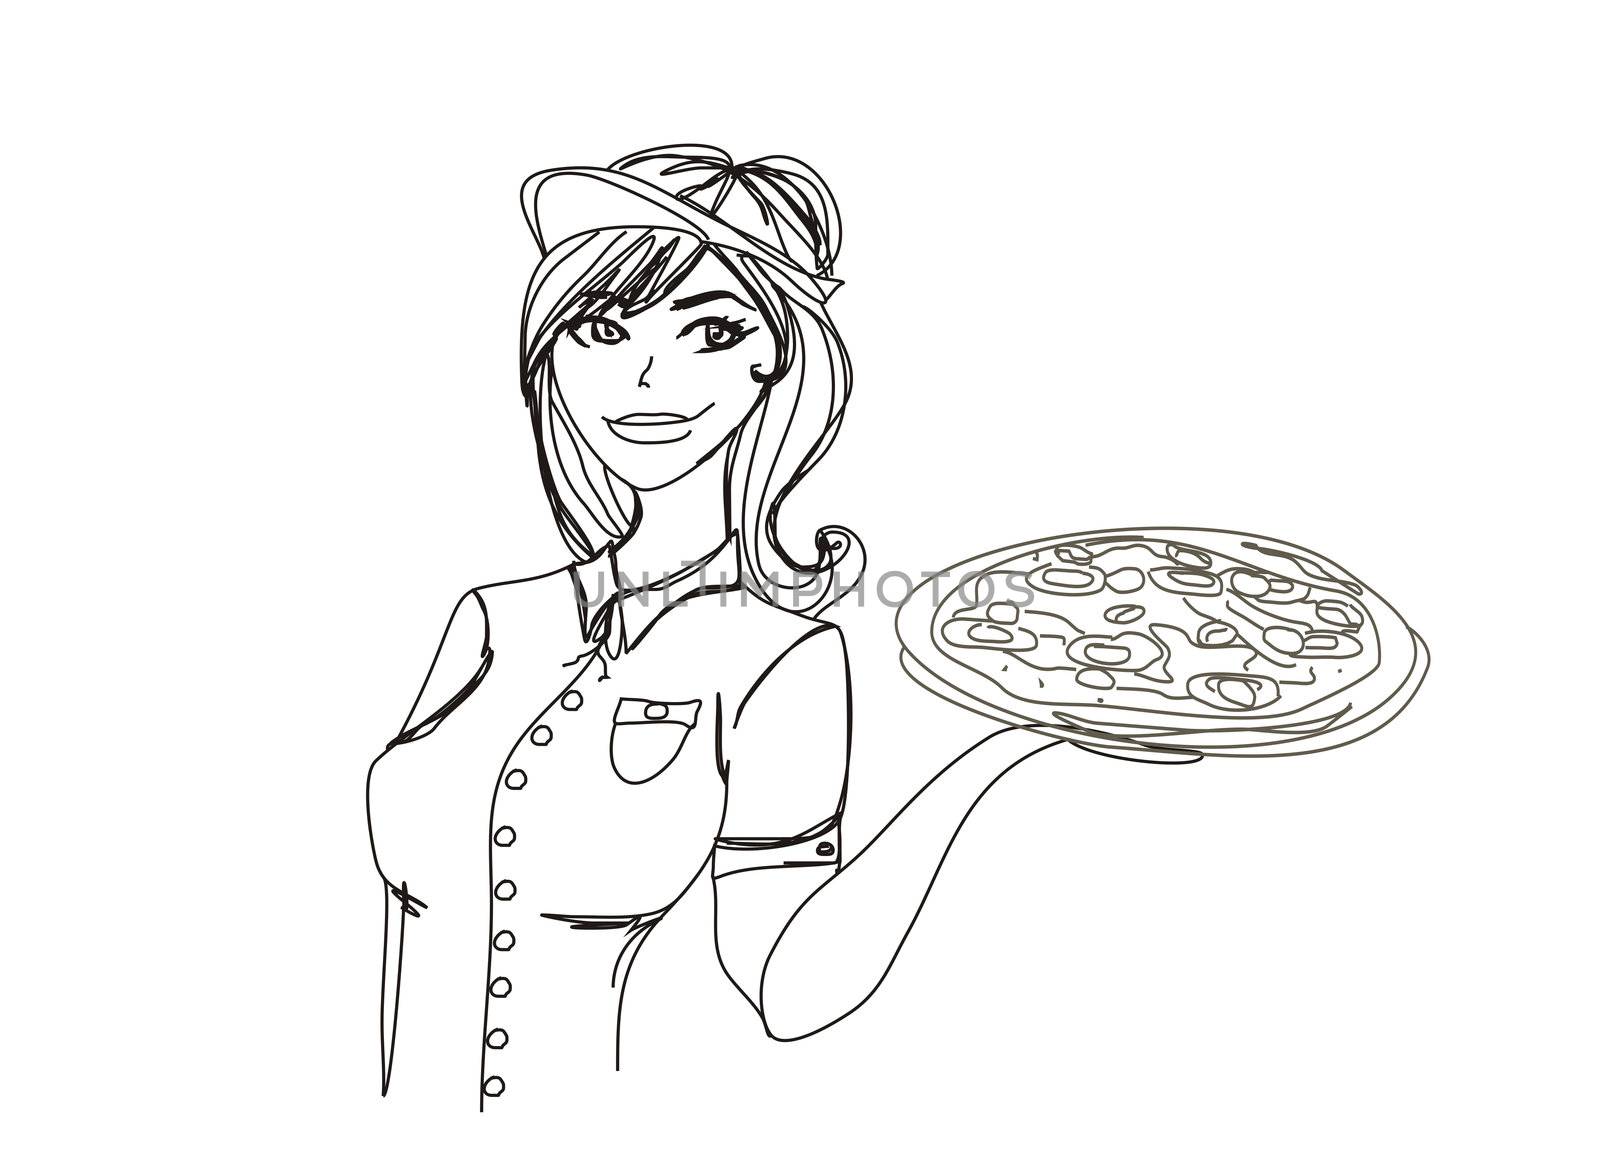 Young waitress with pizza. doodle